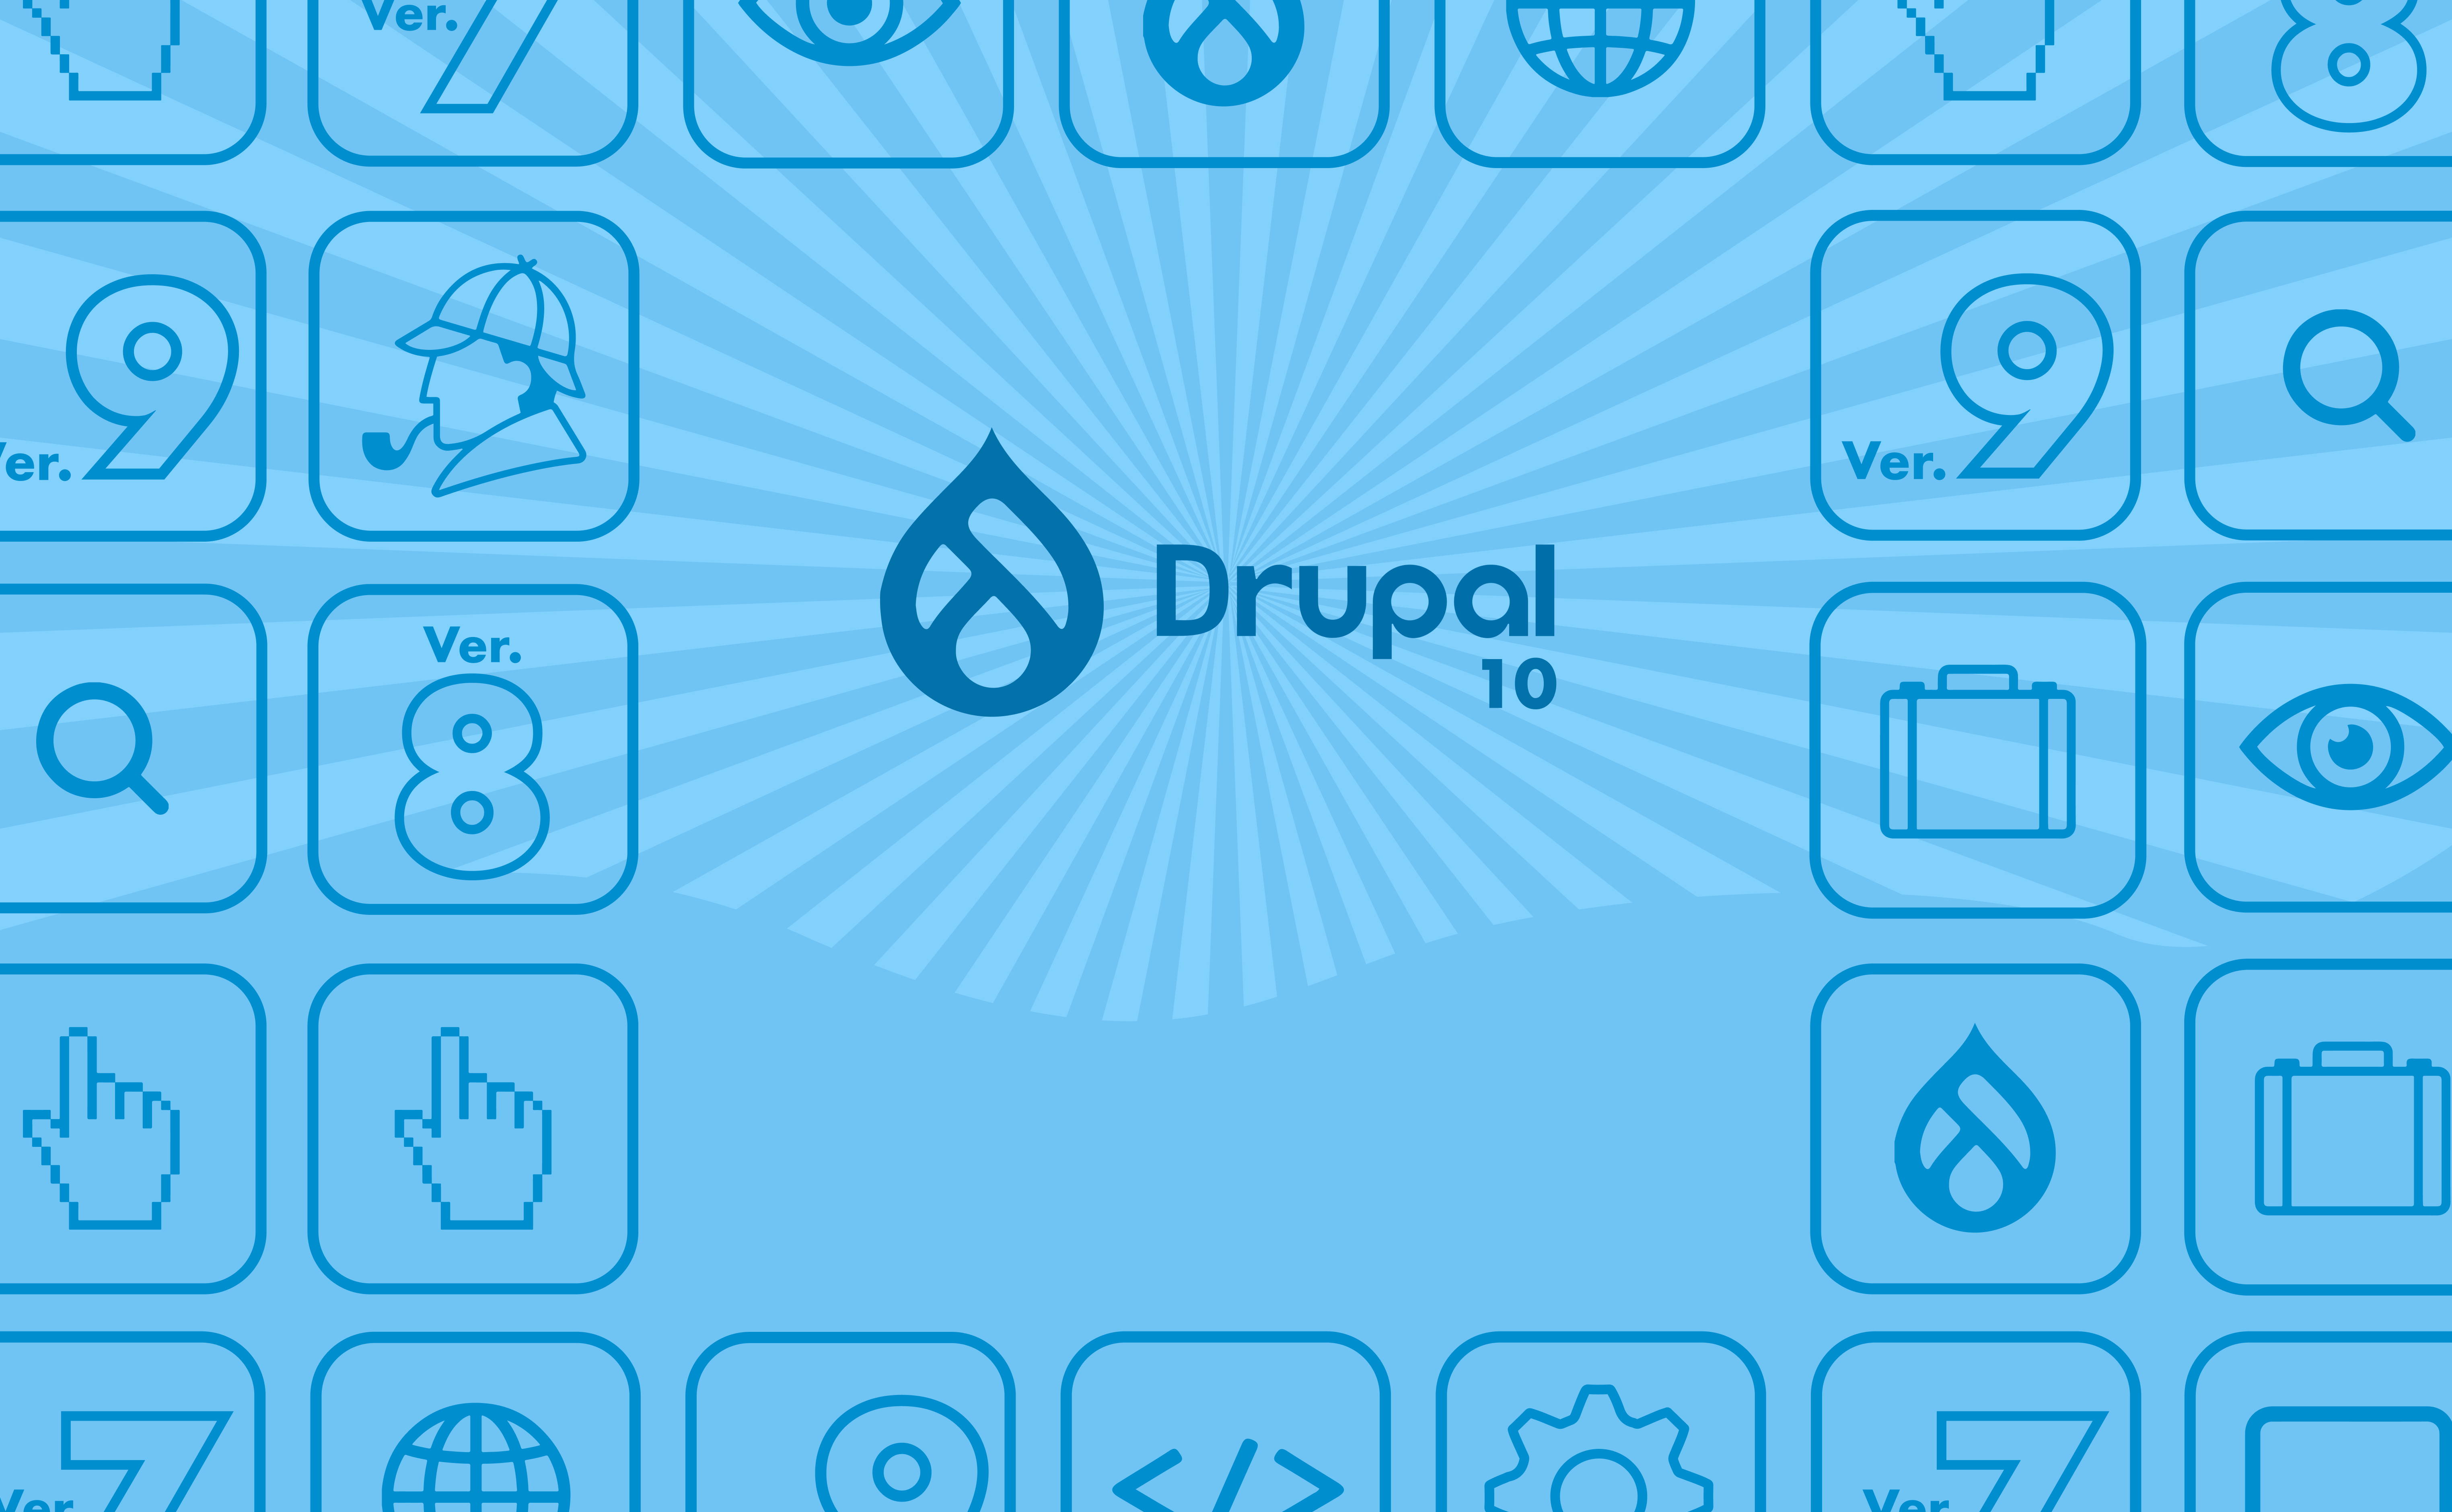 Image of Drupal 10 logo with detective iconography such as a spyglass, suitcase, and detective hat around it with a blue overlay. 